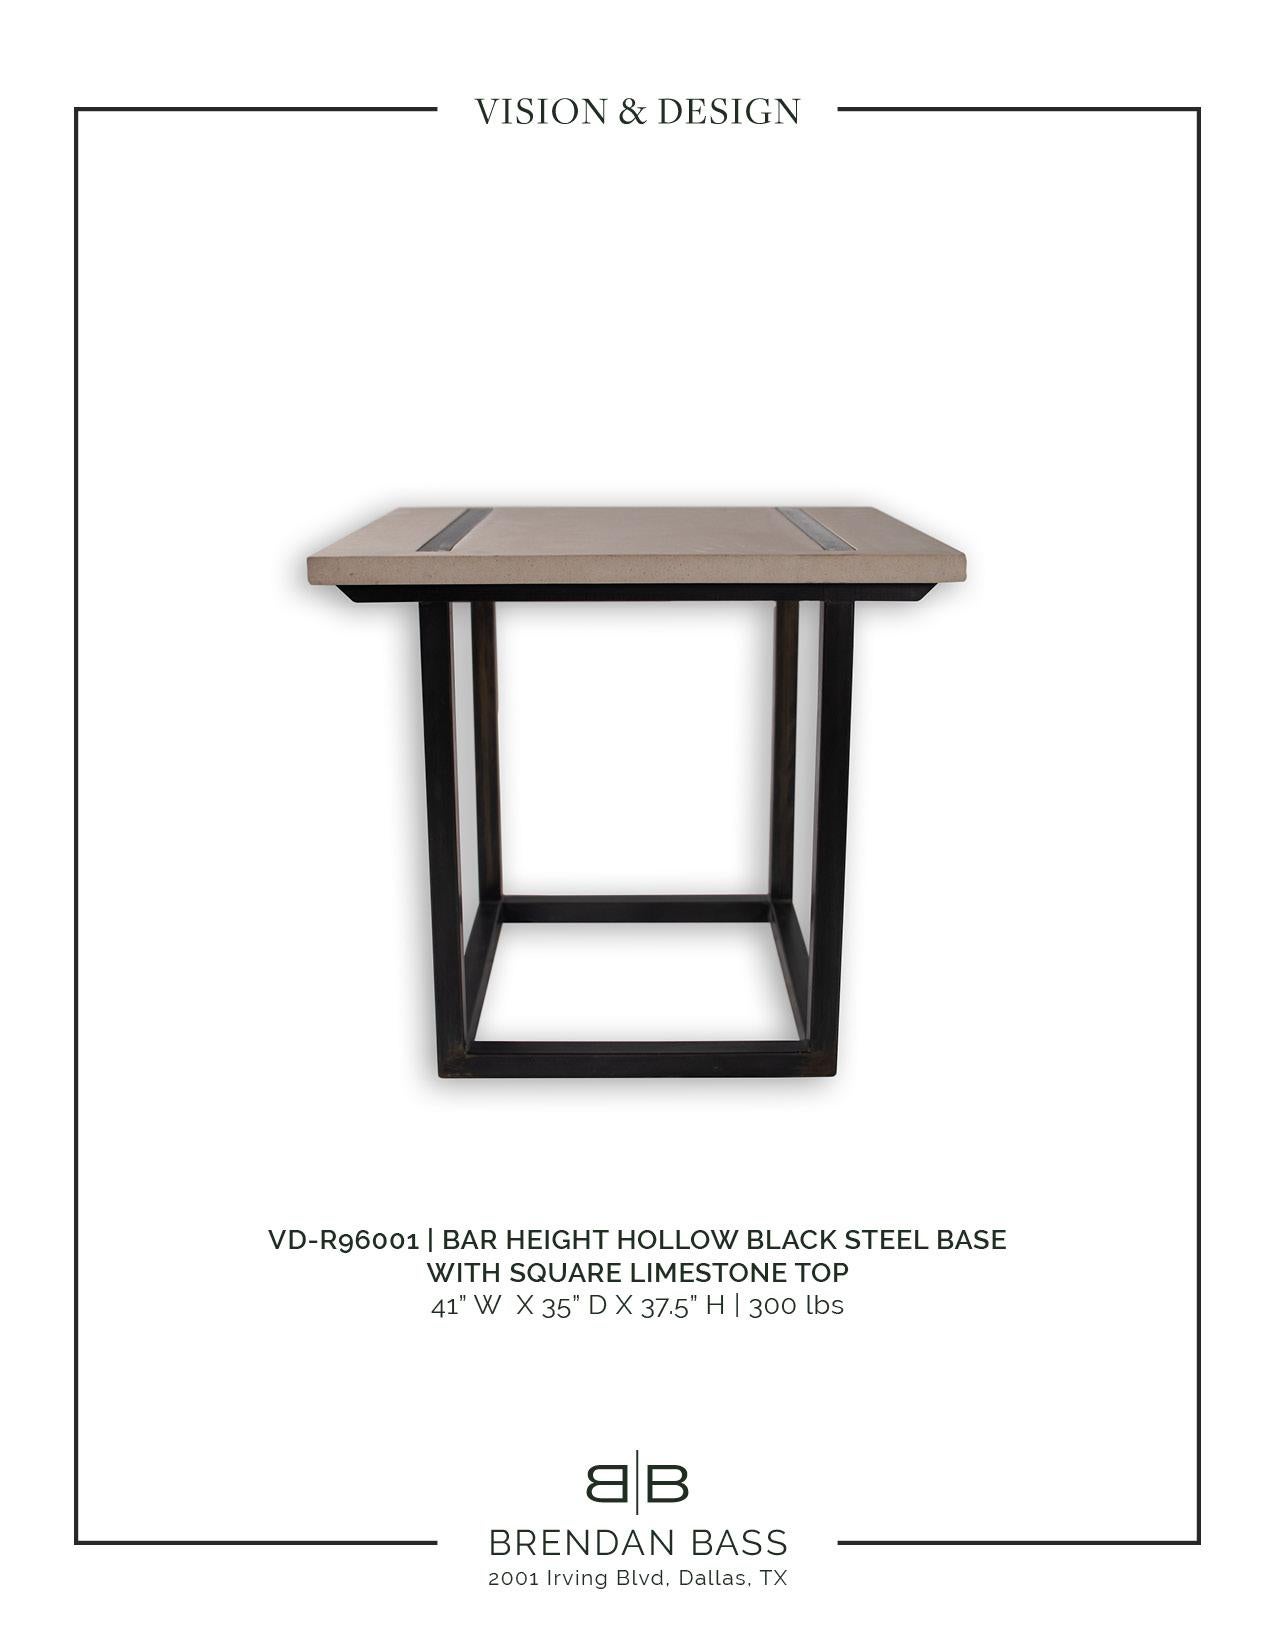 Contemporary Bar Height Hollow Black Steel Base with Square Limestone Top